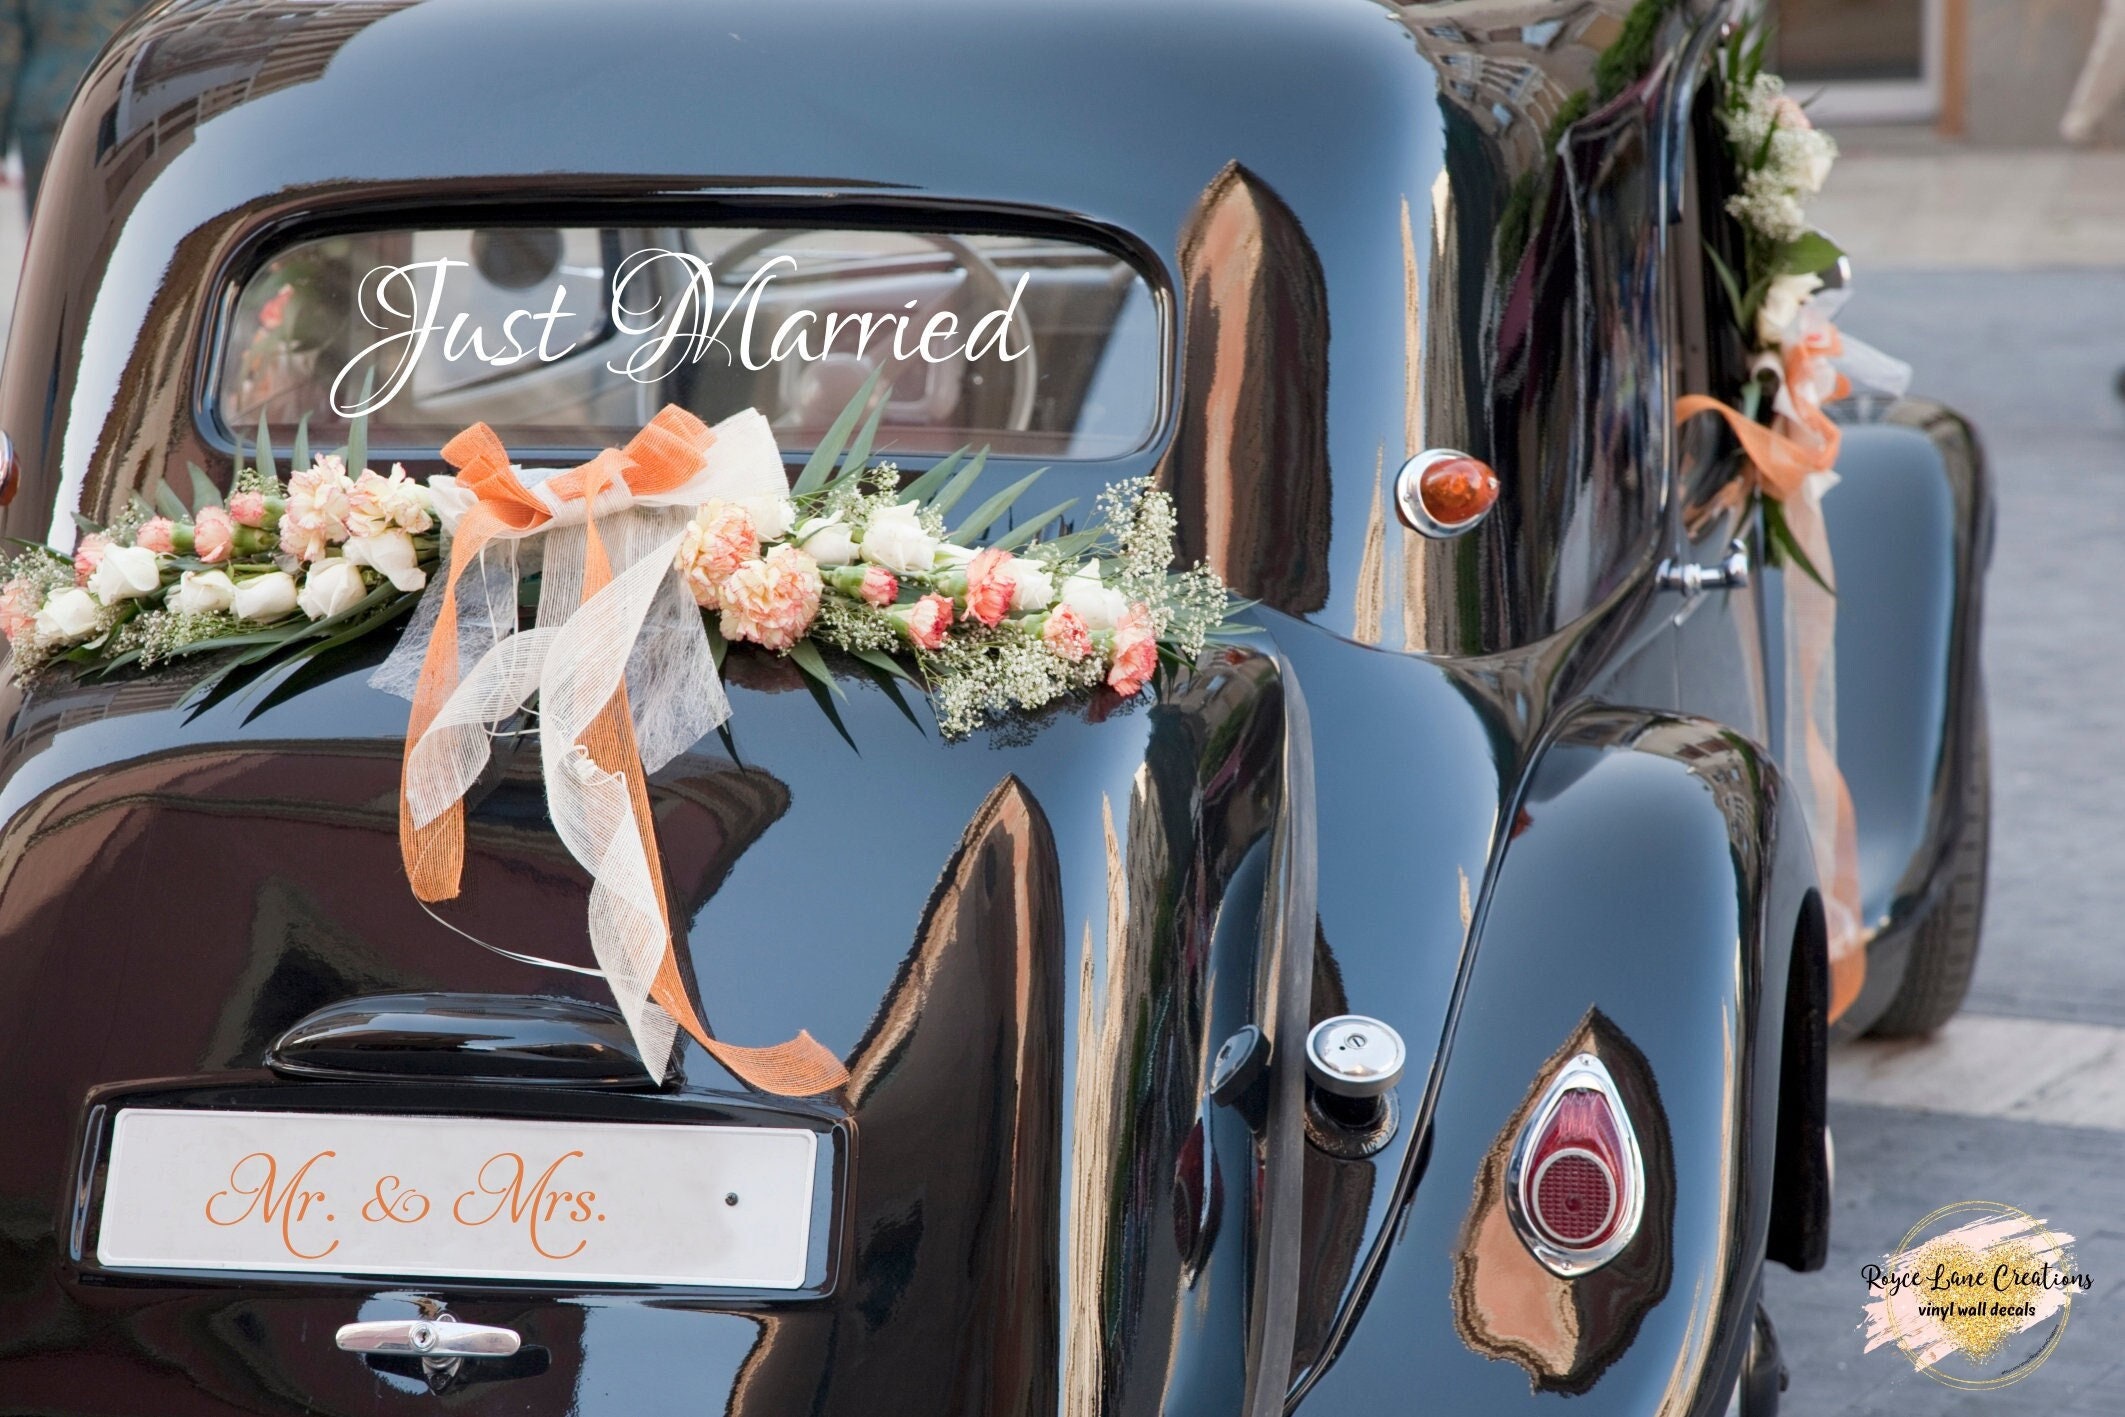 w/Hearts Wedding JUST MARRIED CAR WINDOW SIGN 8"X12" WITH SUCTION CUPS 2 Color 